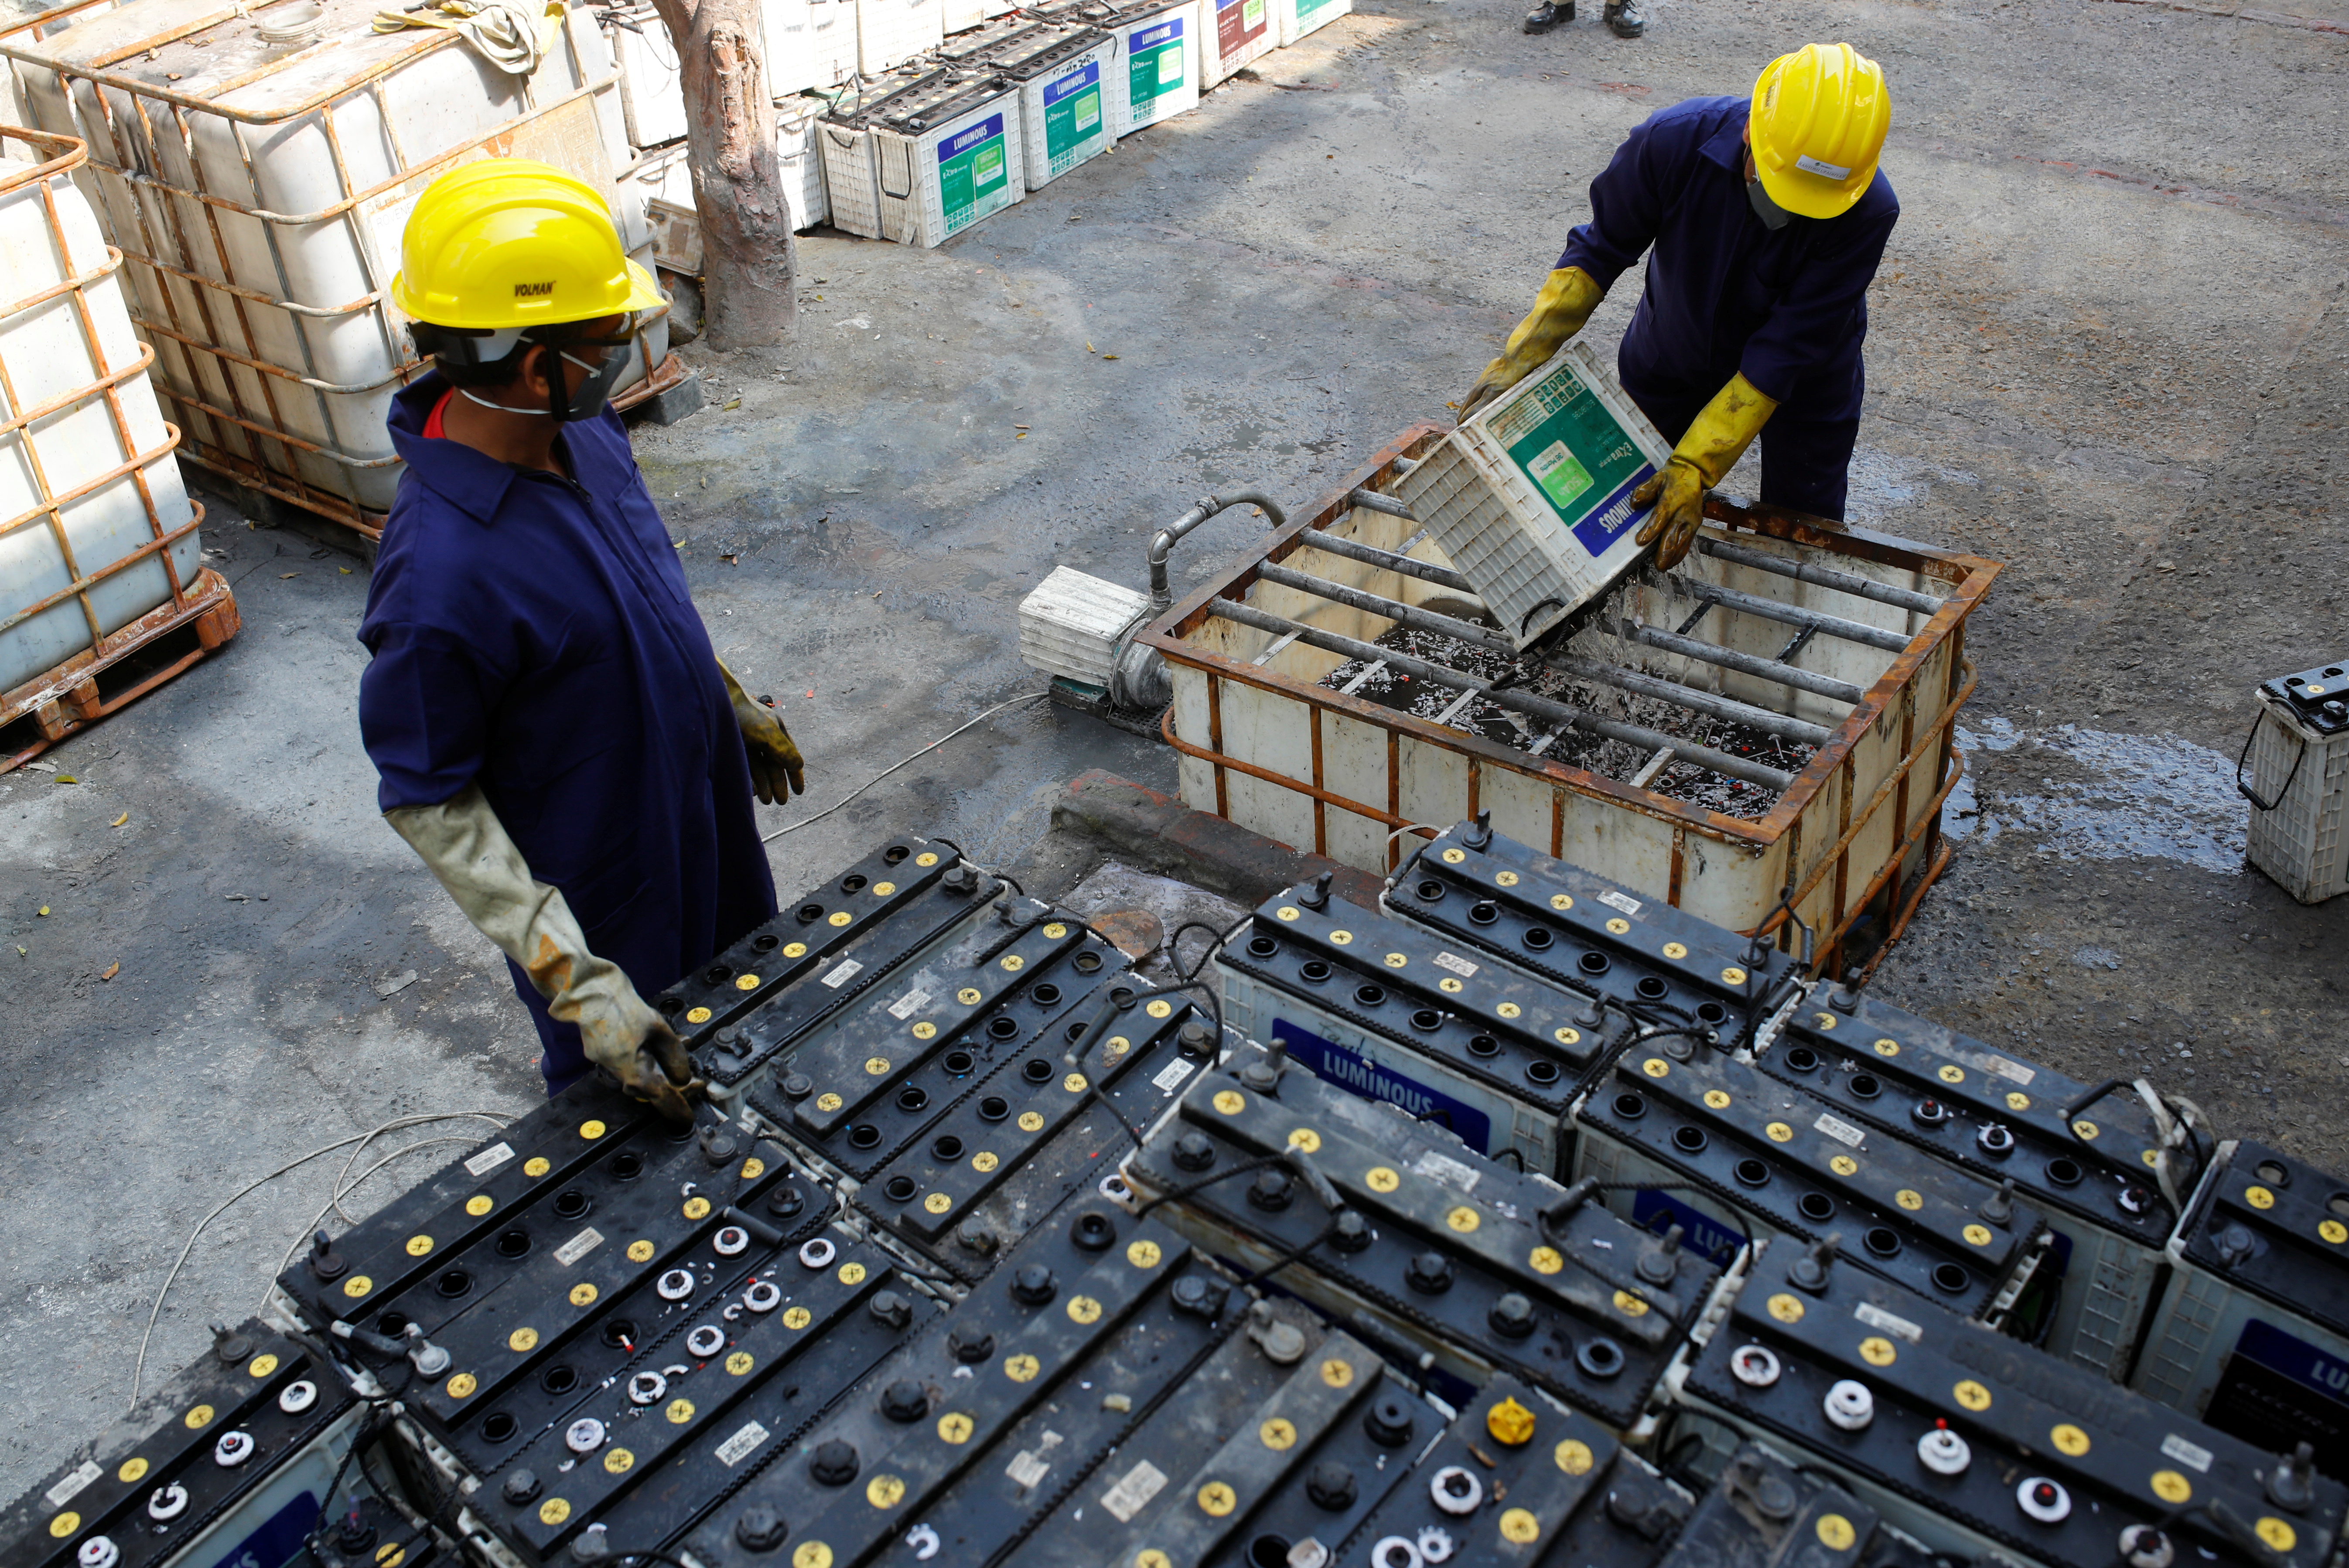 Workers dismantle batteries to obtain lead from them at ACE Green recycling Inc in Ghaziabad